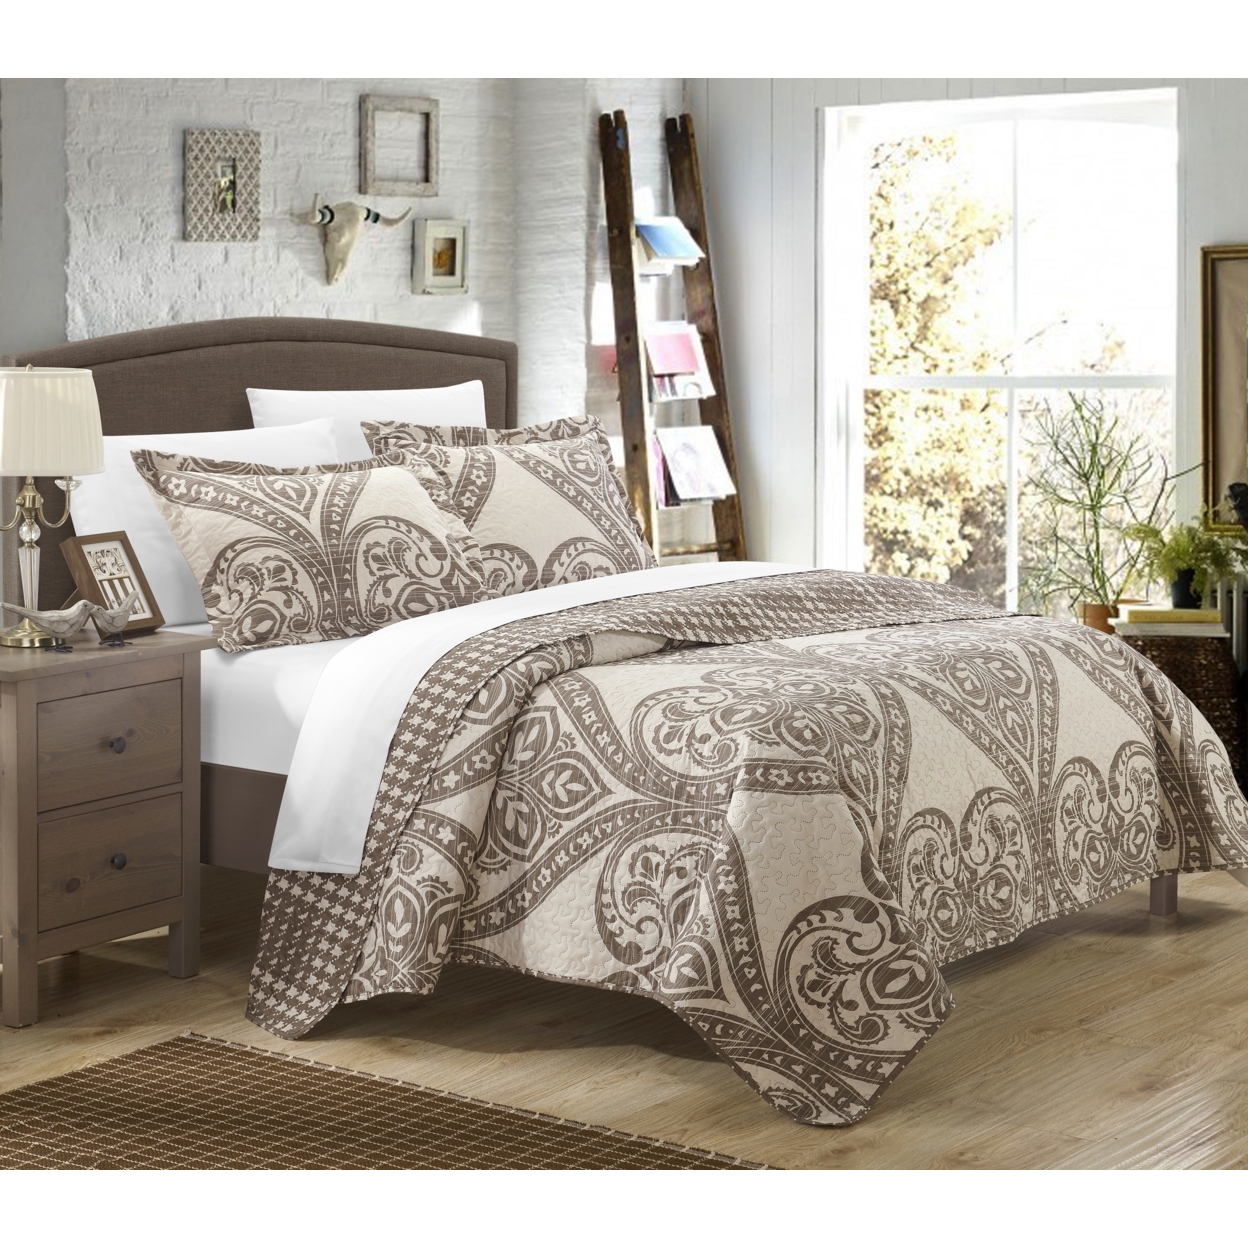 3 Or 2 Piece Revenna REVERSIBLE Printed Quilt Set. Front A Traditional Pattern And Reverses Into A Houndstooth Pattern - Beige, Queen